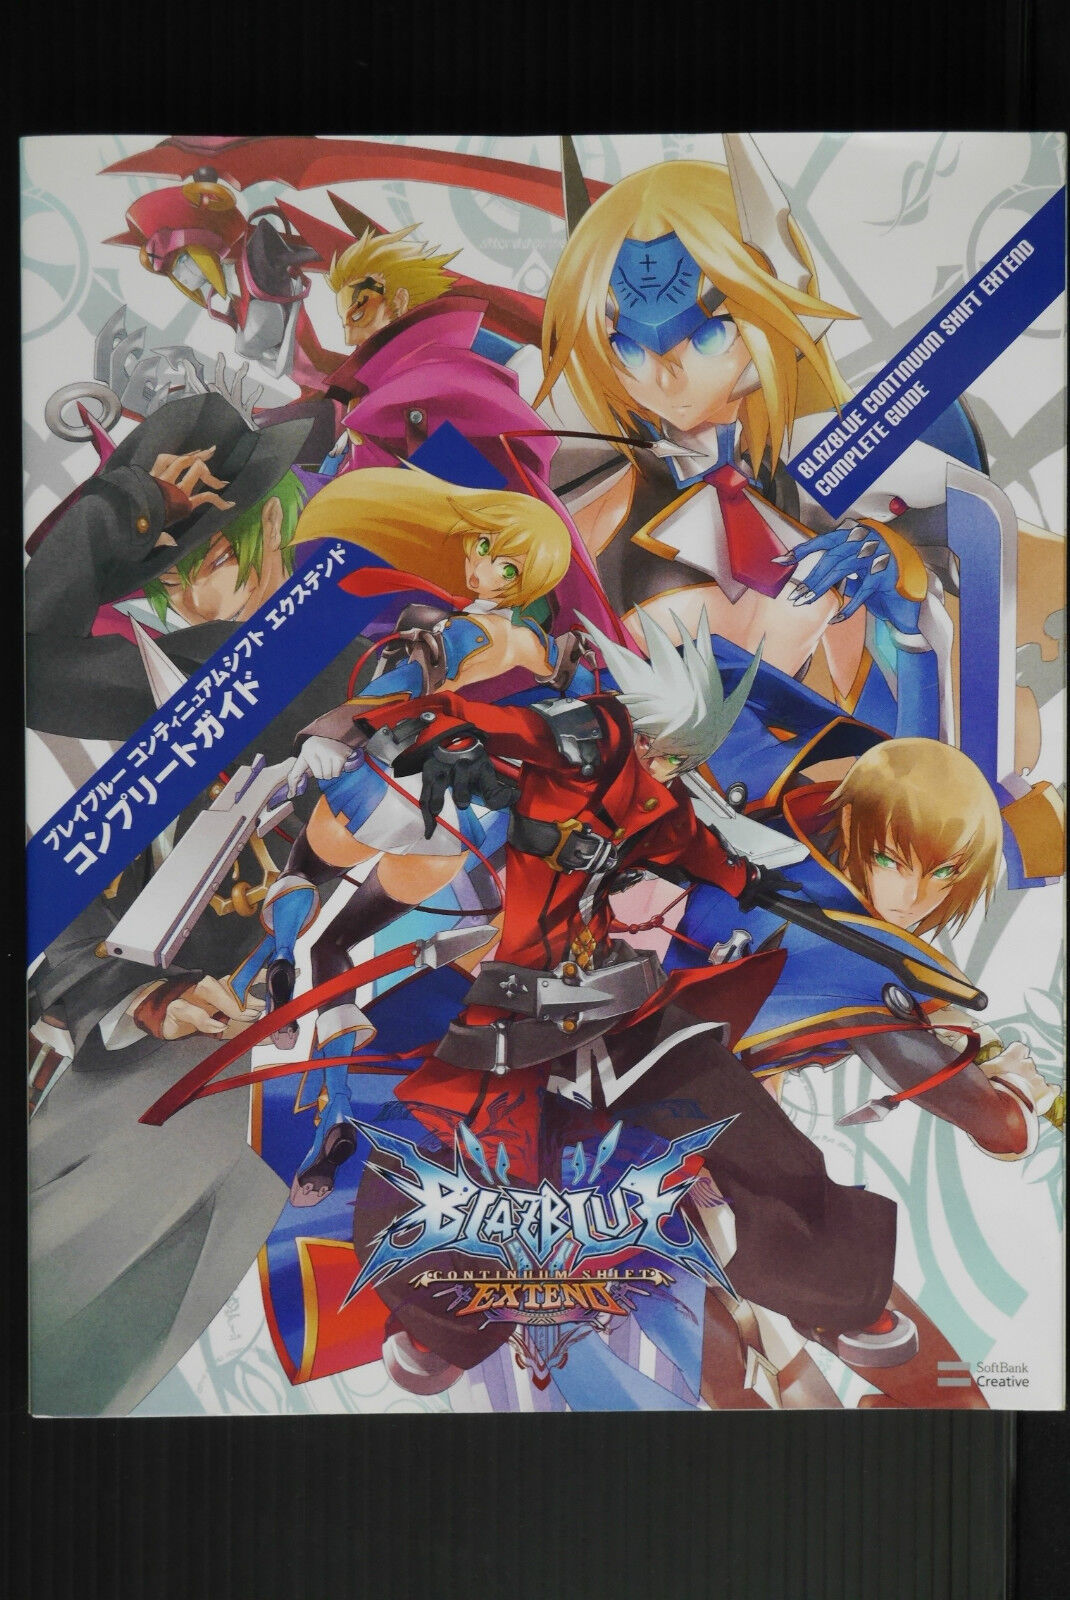 BlazBlue Continuum Shift Extend - Complete Guide - Arc System Works Book - Japan